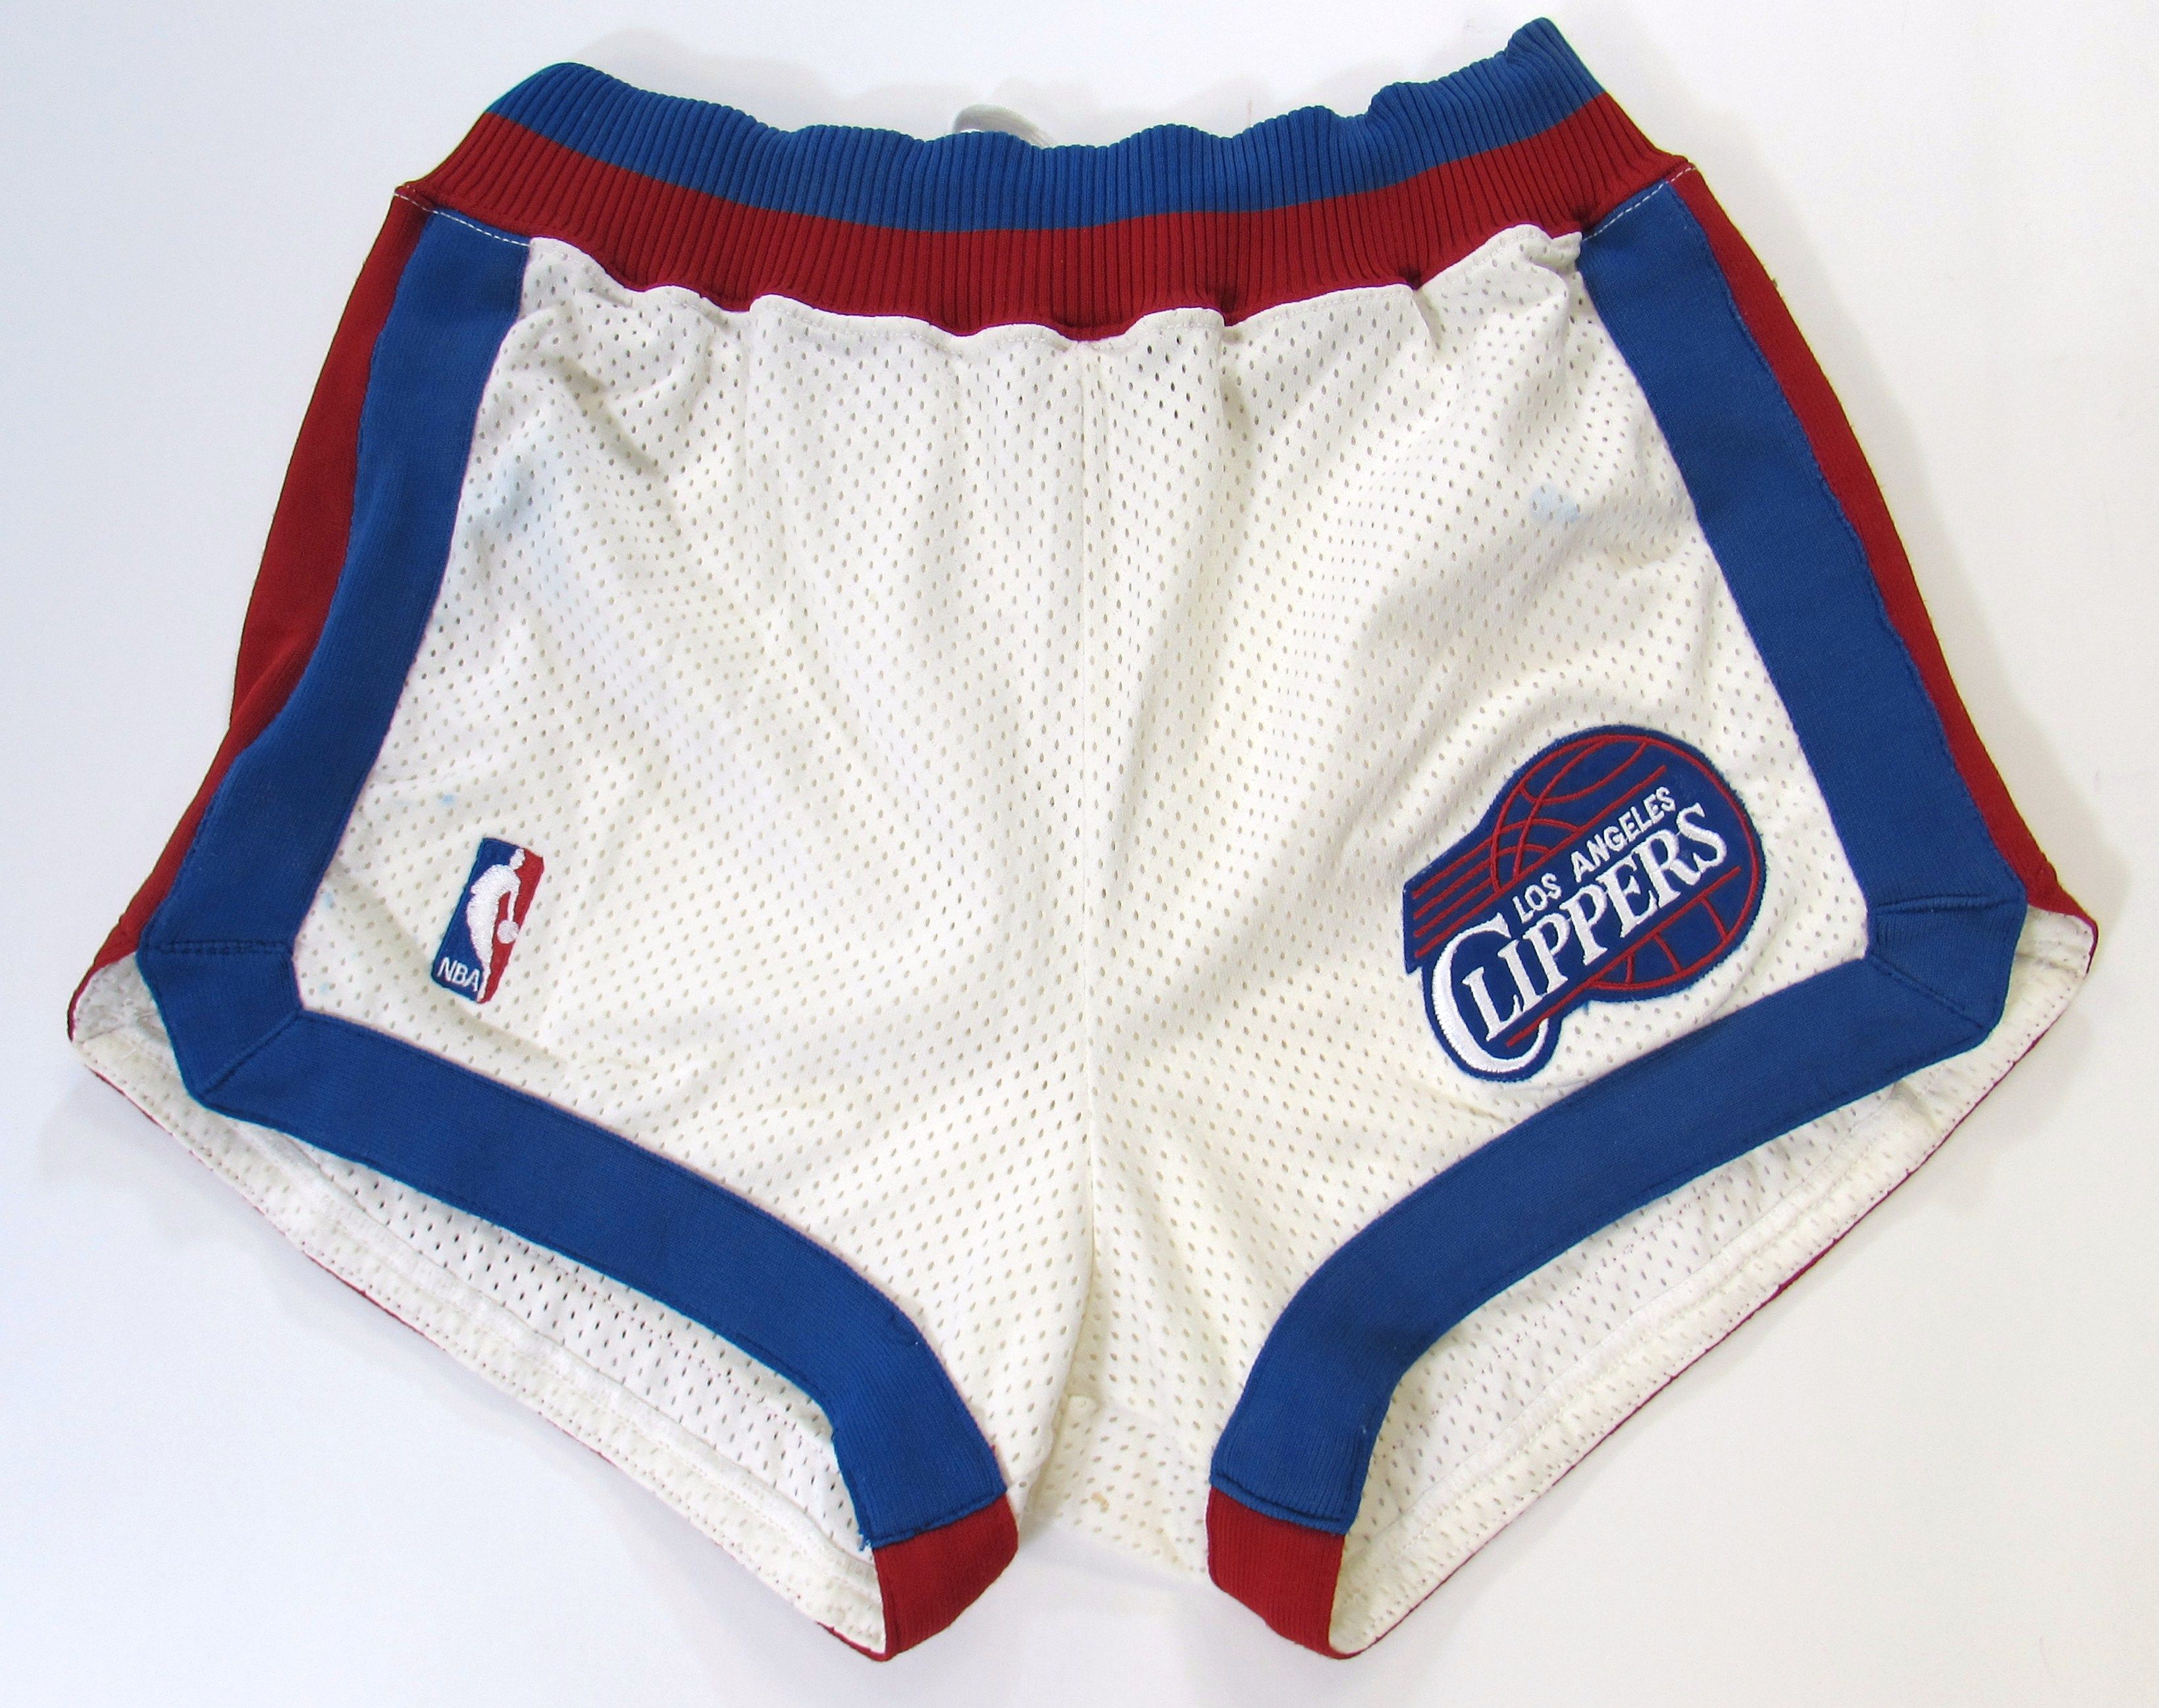 NBA Los Angeles Clippers Just Don Shorts